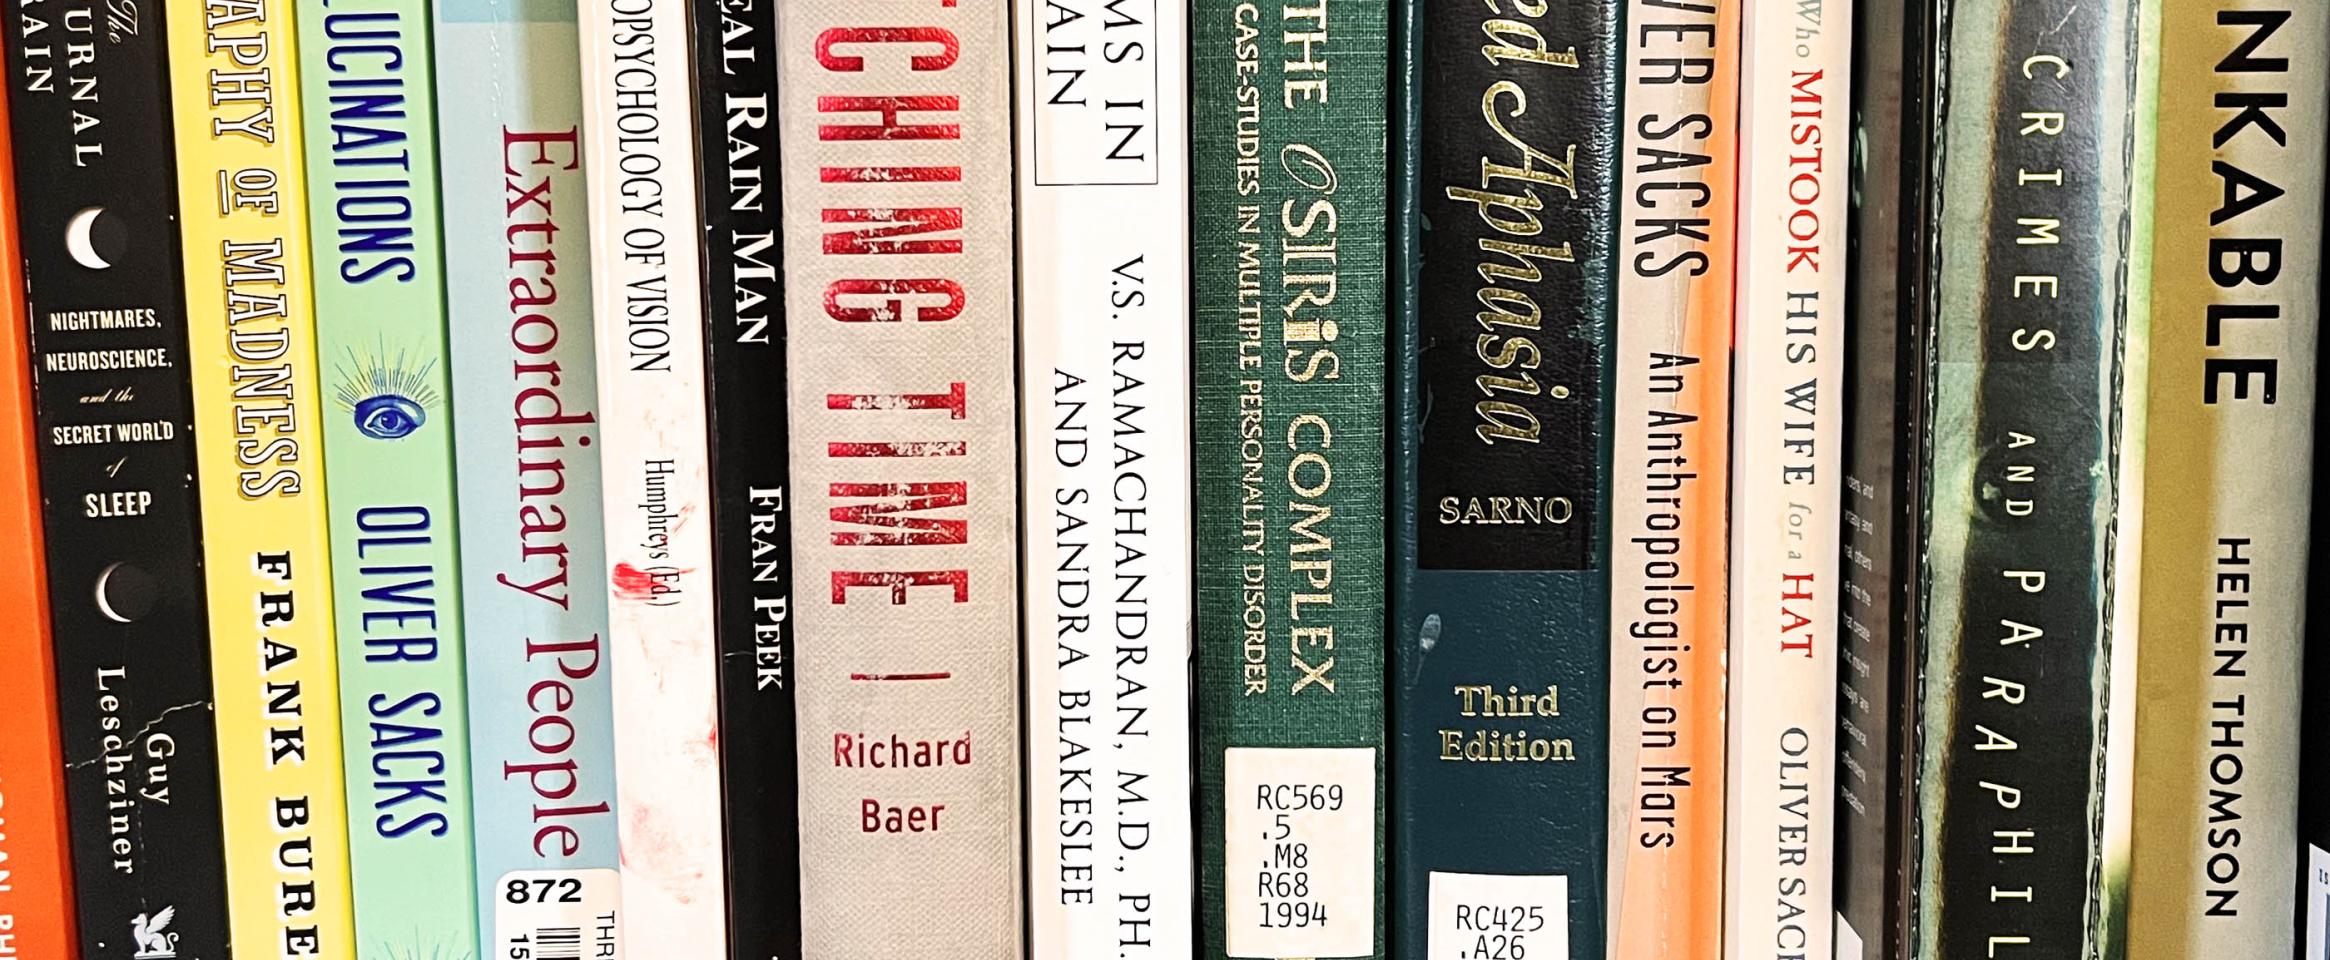 Horizontal photo of a bookshelf with various book spines visible, many with library catalog stickers, and a few authored by Oliver Sacks. Photo by Marc Dingman